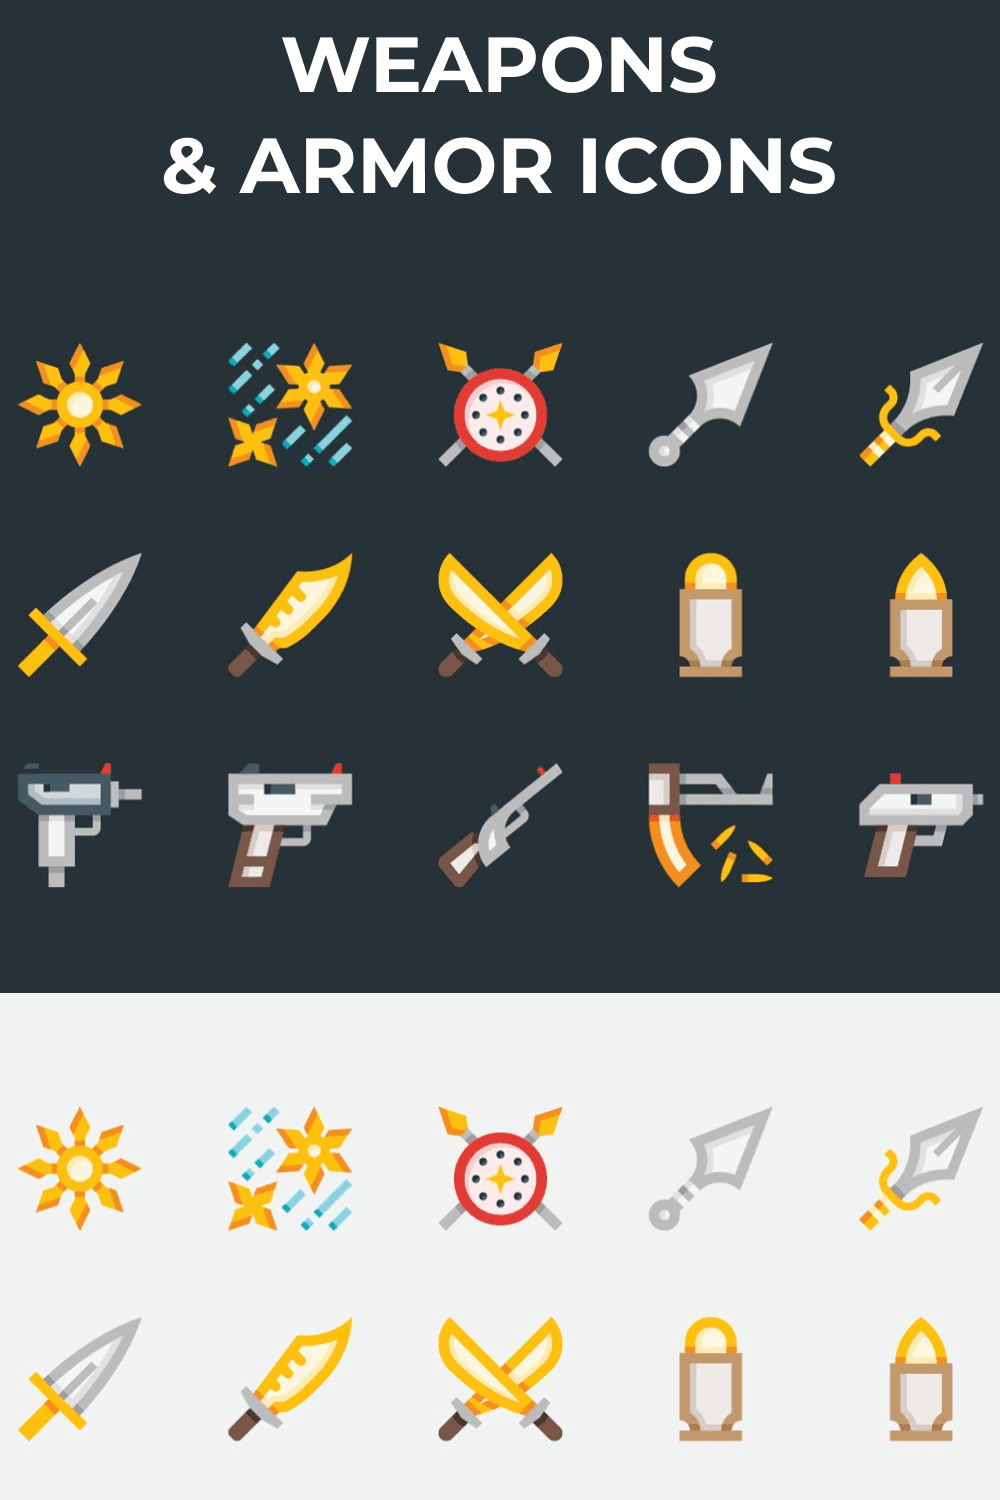 Weapons and Armor Icons.